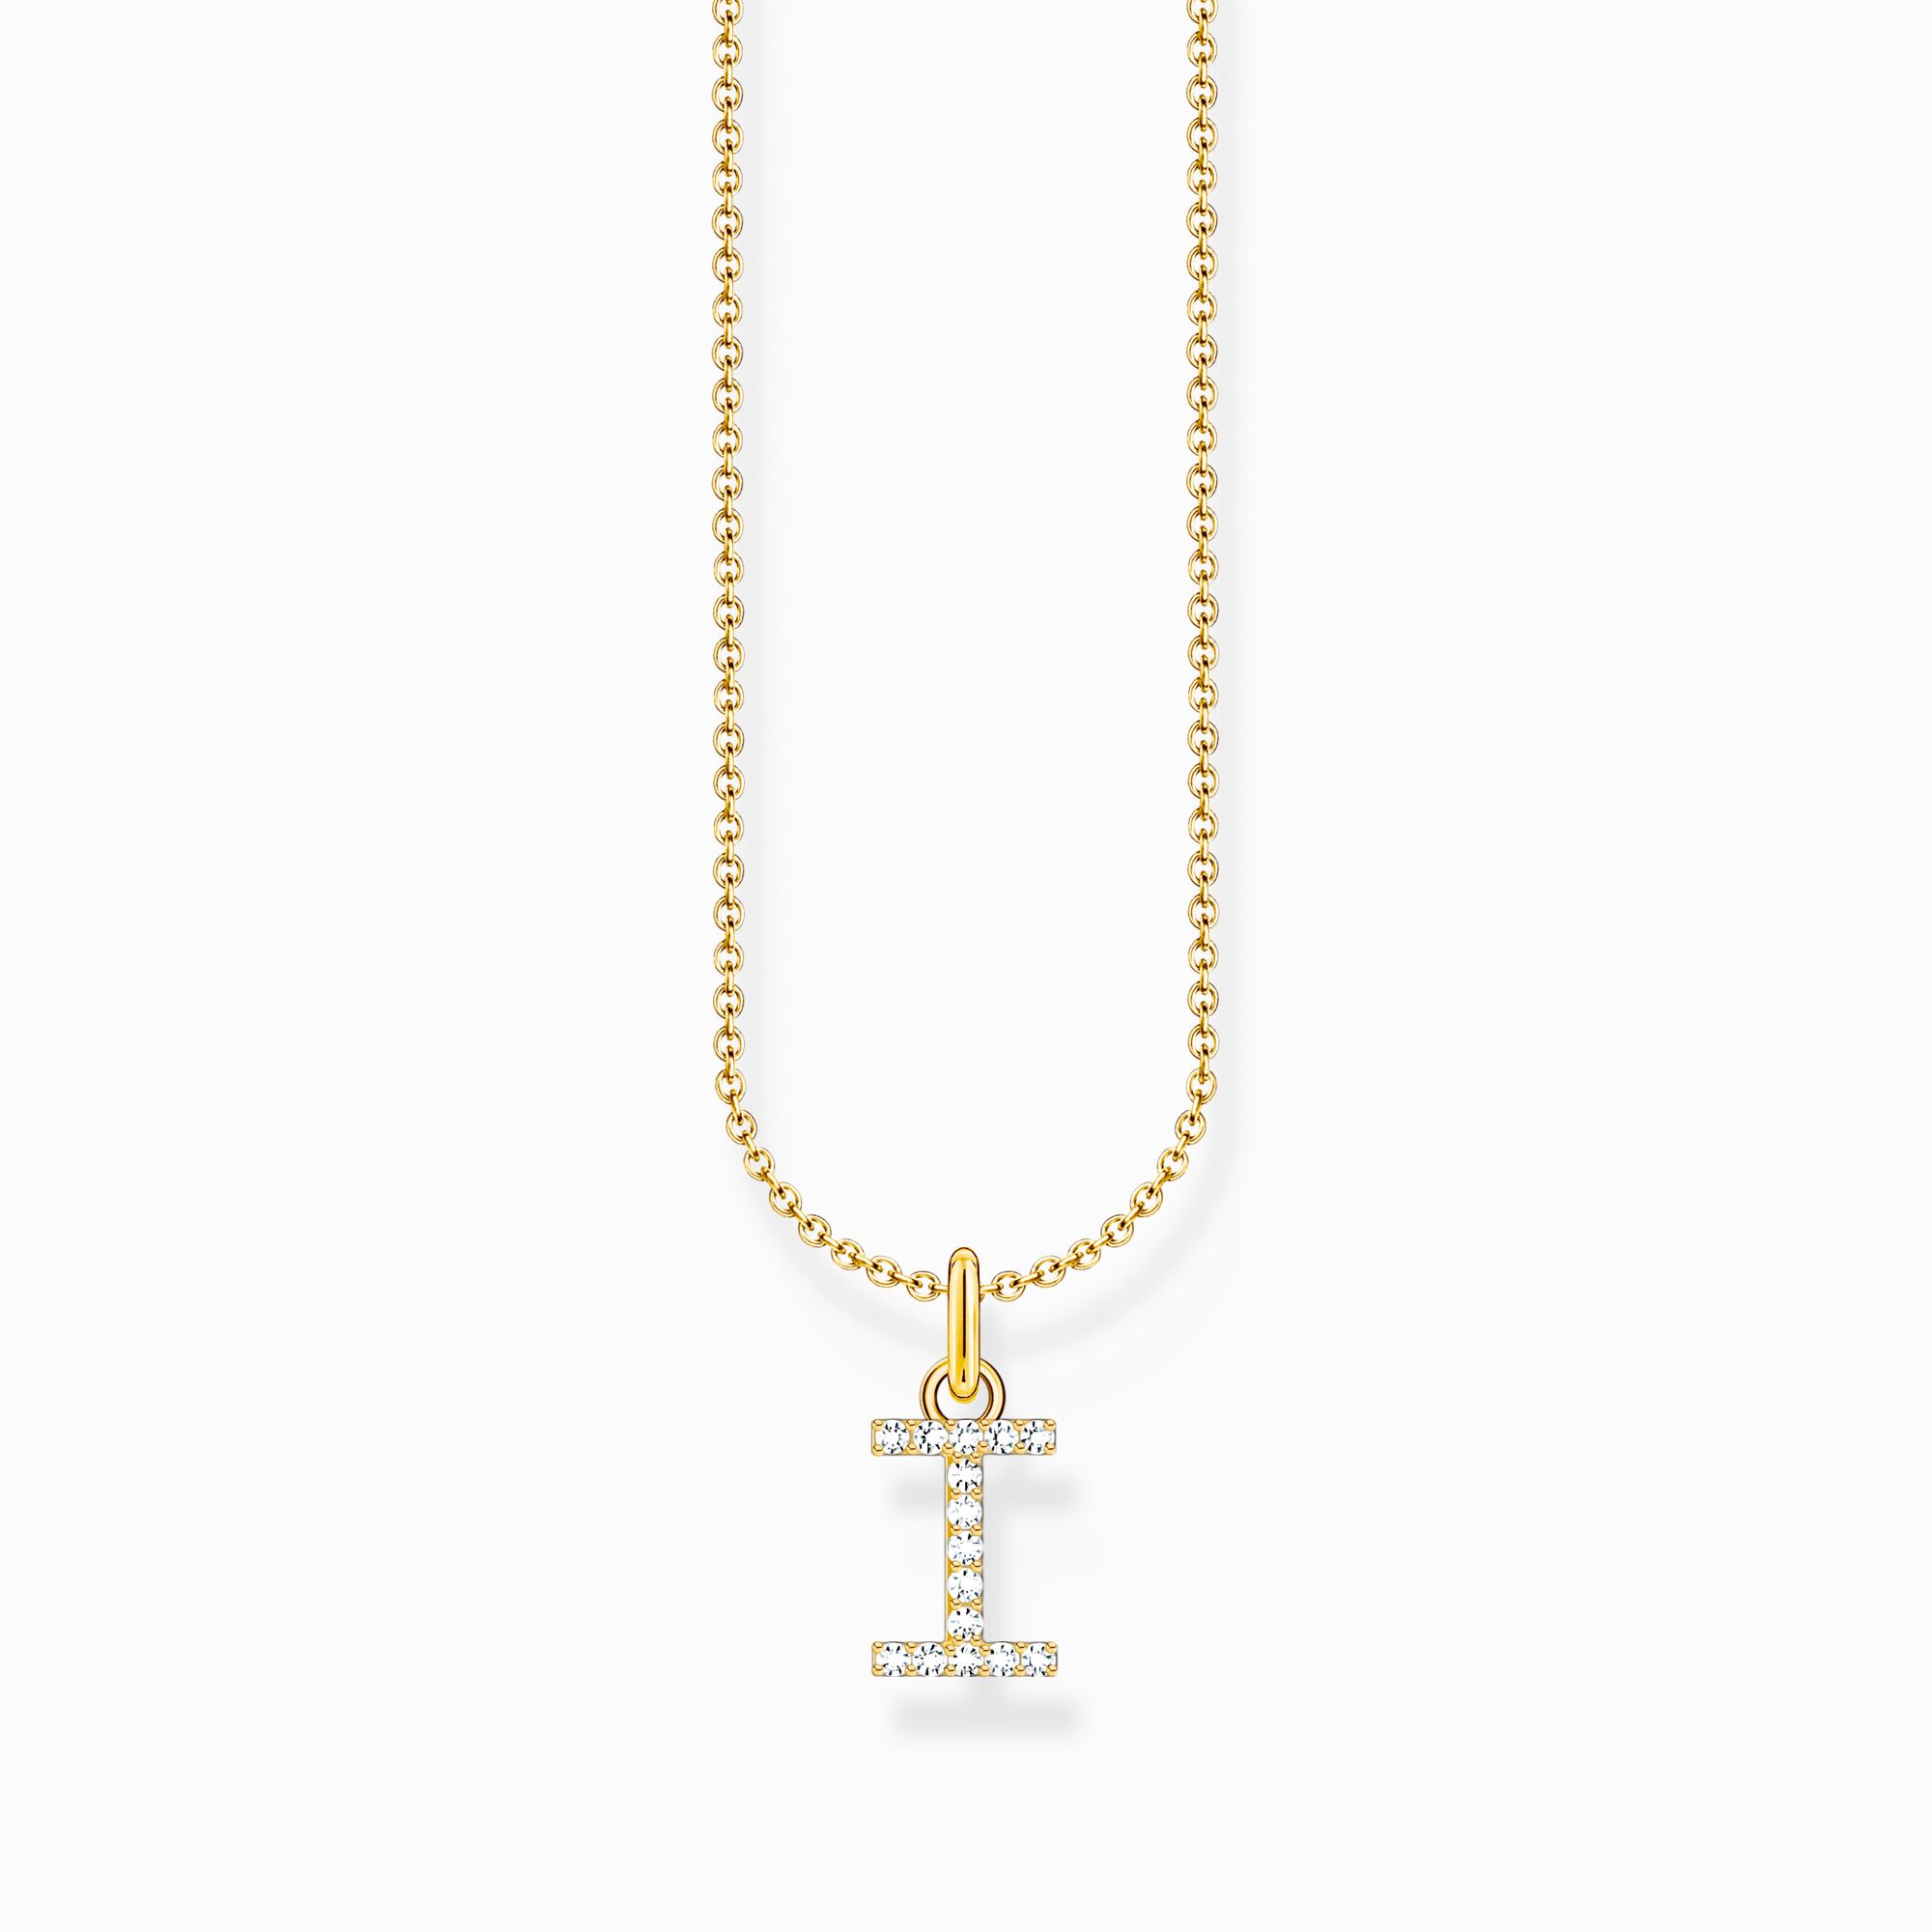 Gold-plated necklace with letter pendant I and white zirconia from the Charming Collection collection in the THOMAS SABO online store